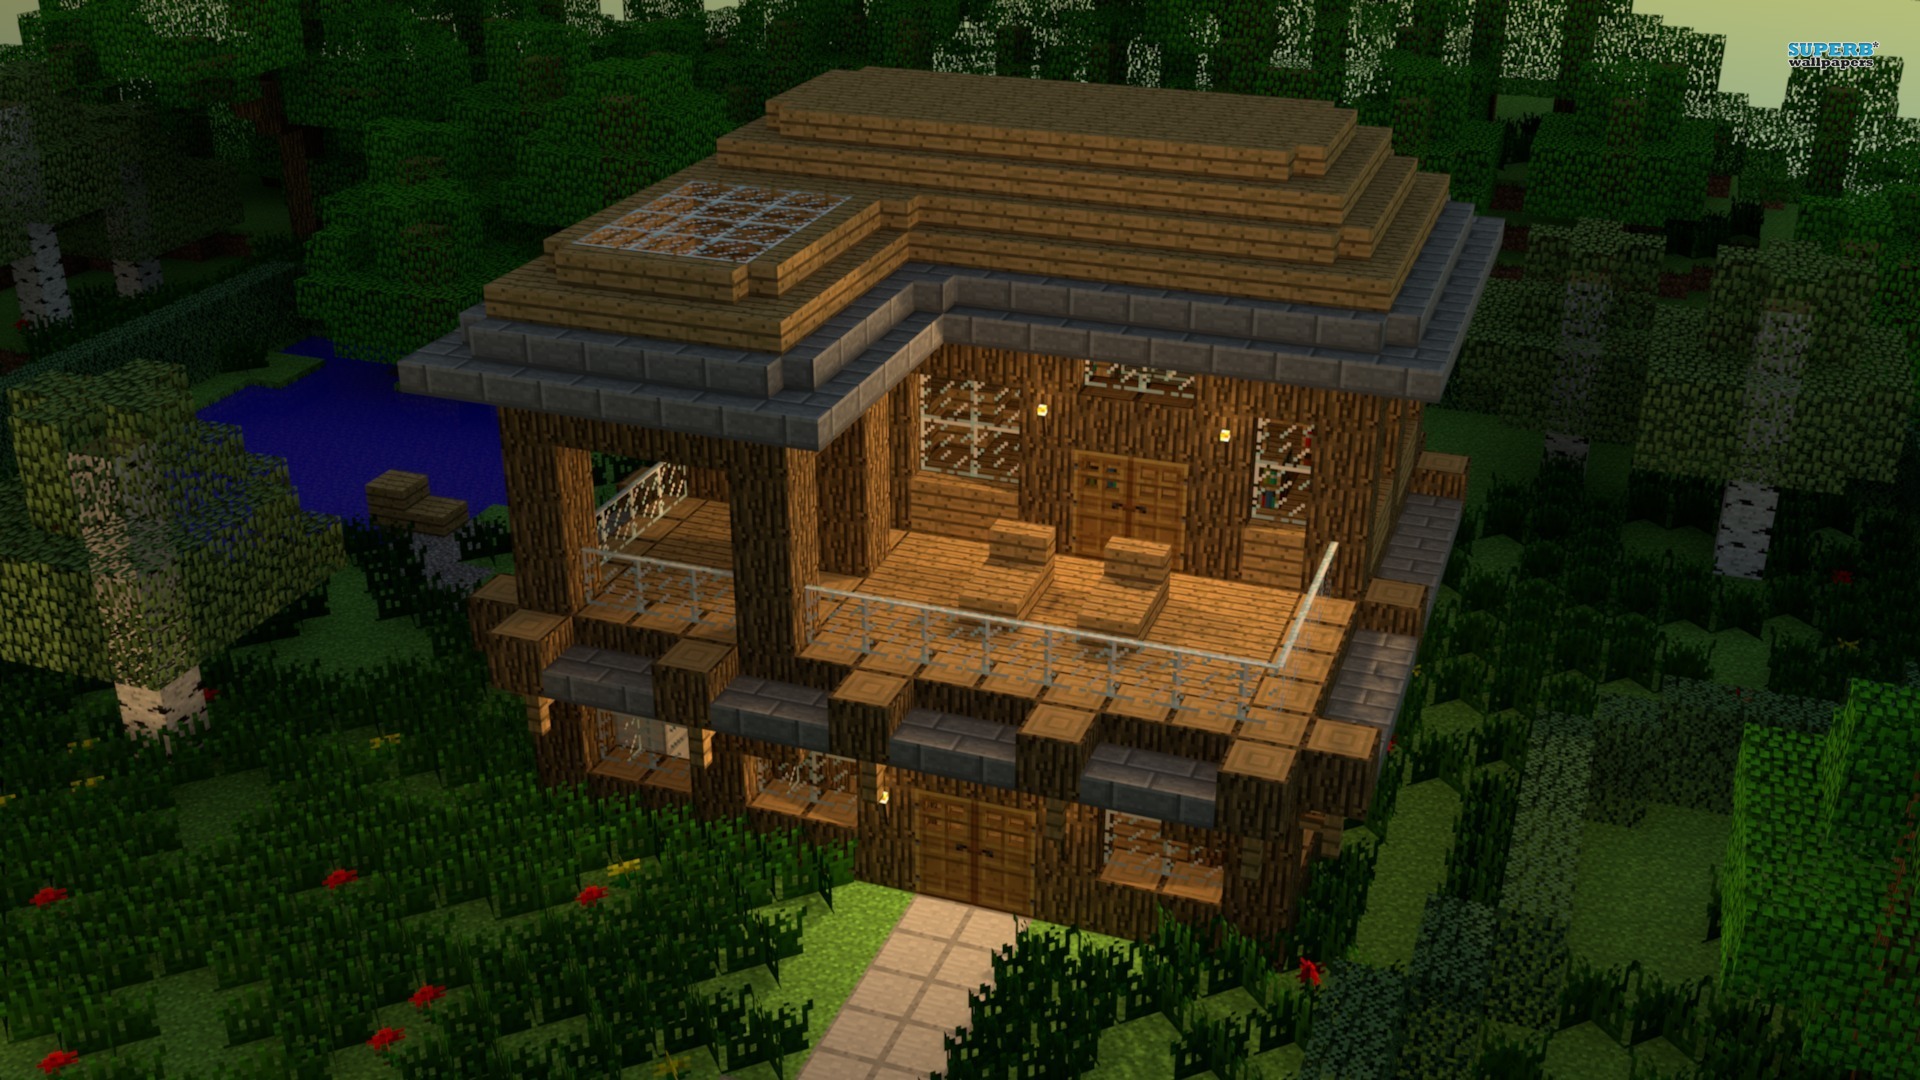 House In Minecraft 15310 1920x1080jpg Members Albums Category